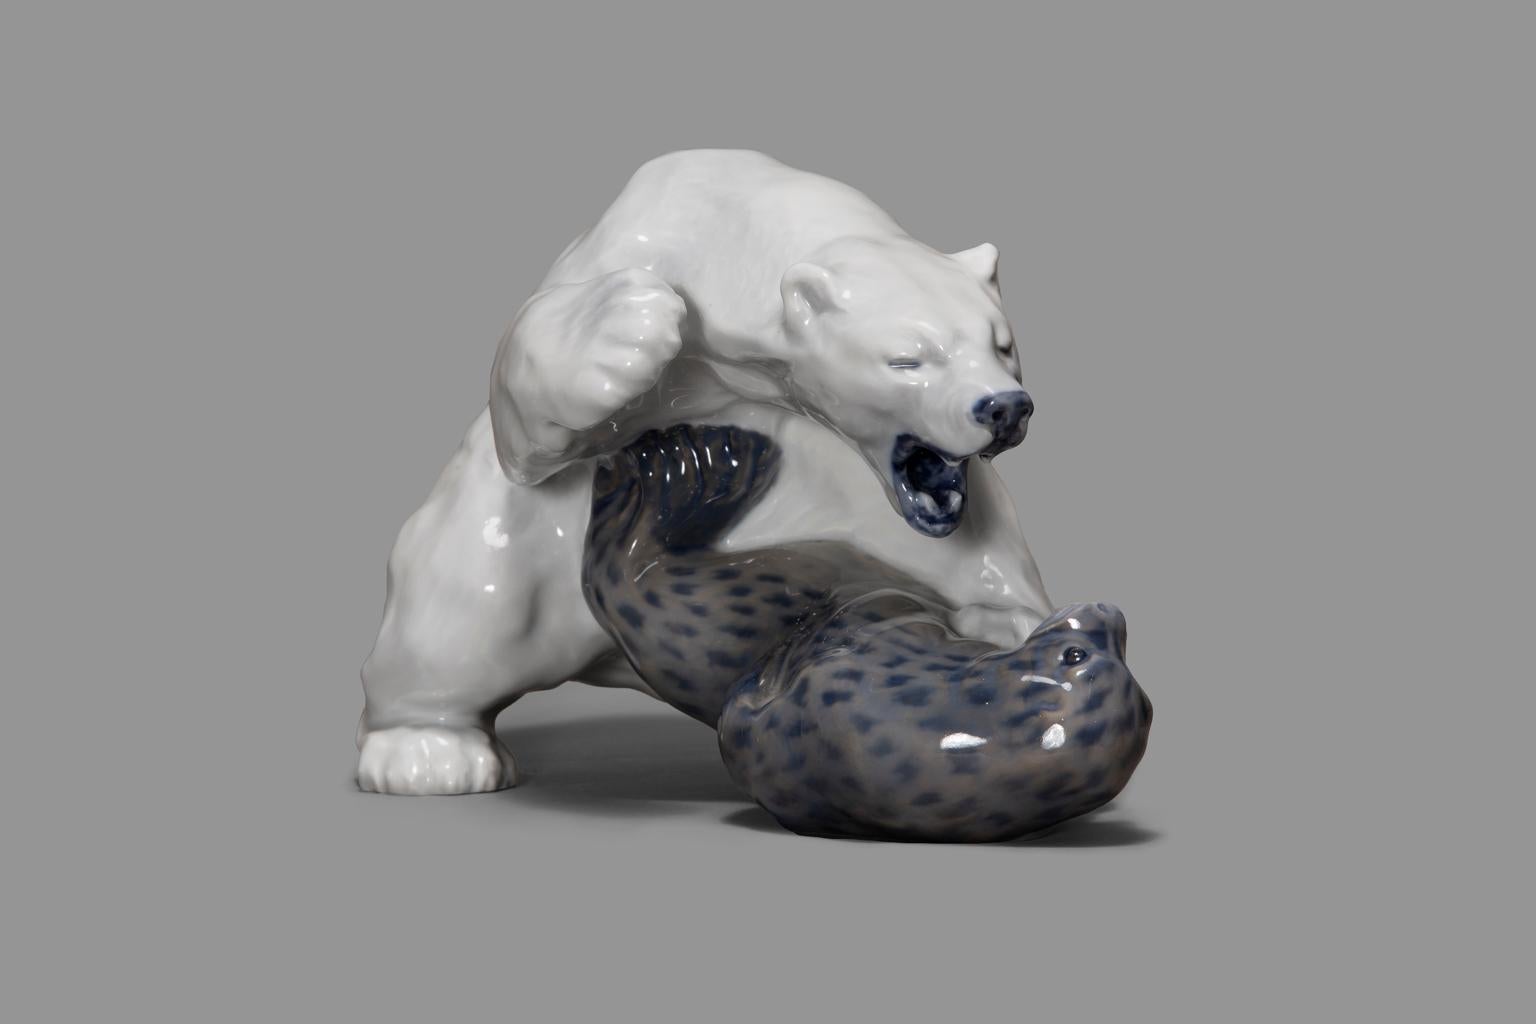 Royal Copenhagen's Polar Bear and Seal were designed by Knud Carl Edvard Kyhn around 1908/9 and has been a popular porcelain figurine #1108.

Knud Carl Edvard Kahn (1880 - 1969) was a Danish painter, draftsman and ceramic sculptor. He was the nephew